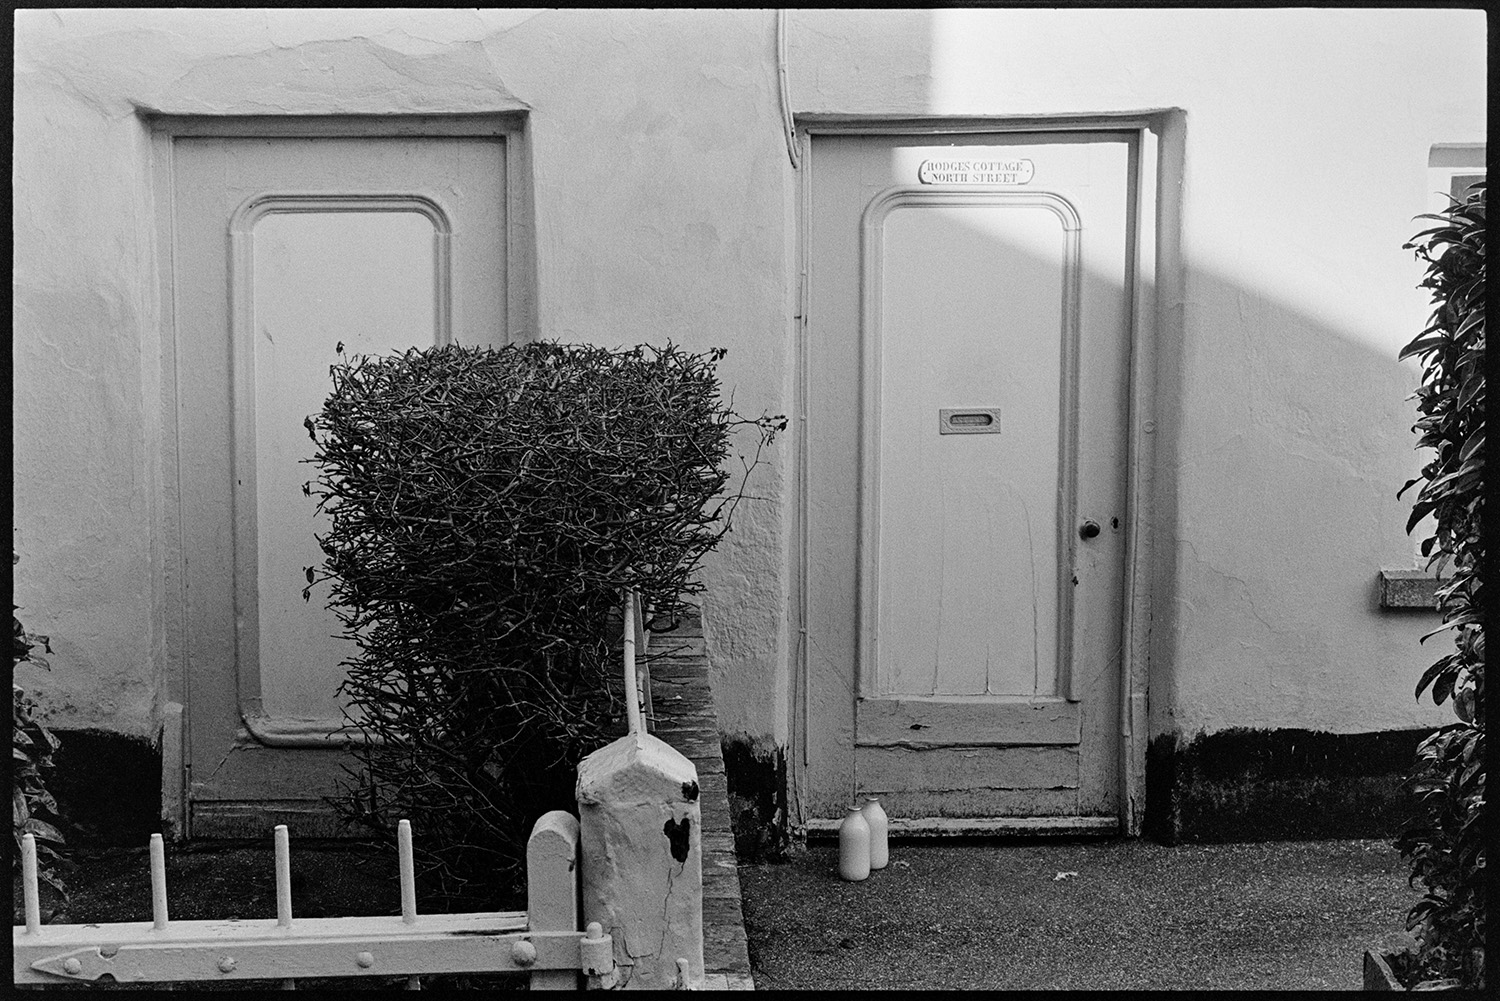 Man taking in his milk, two interesting doorways, one blocked. 
[Two milk bottles outside the front door of Hodges Cottage, North Street, Dolton, where Harold Pickard lived, also known as Argo Pickard. The door of the adjacent cottage is blocked.]